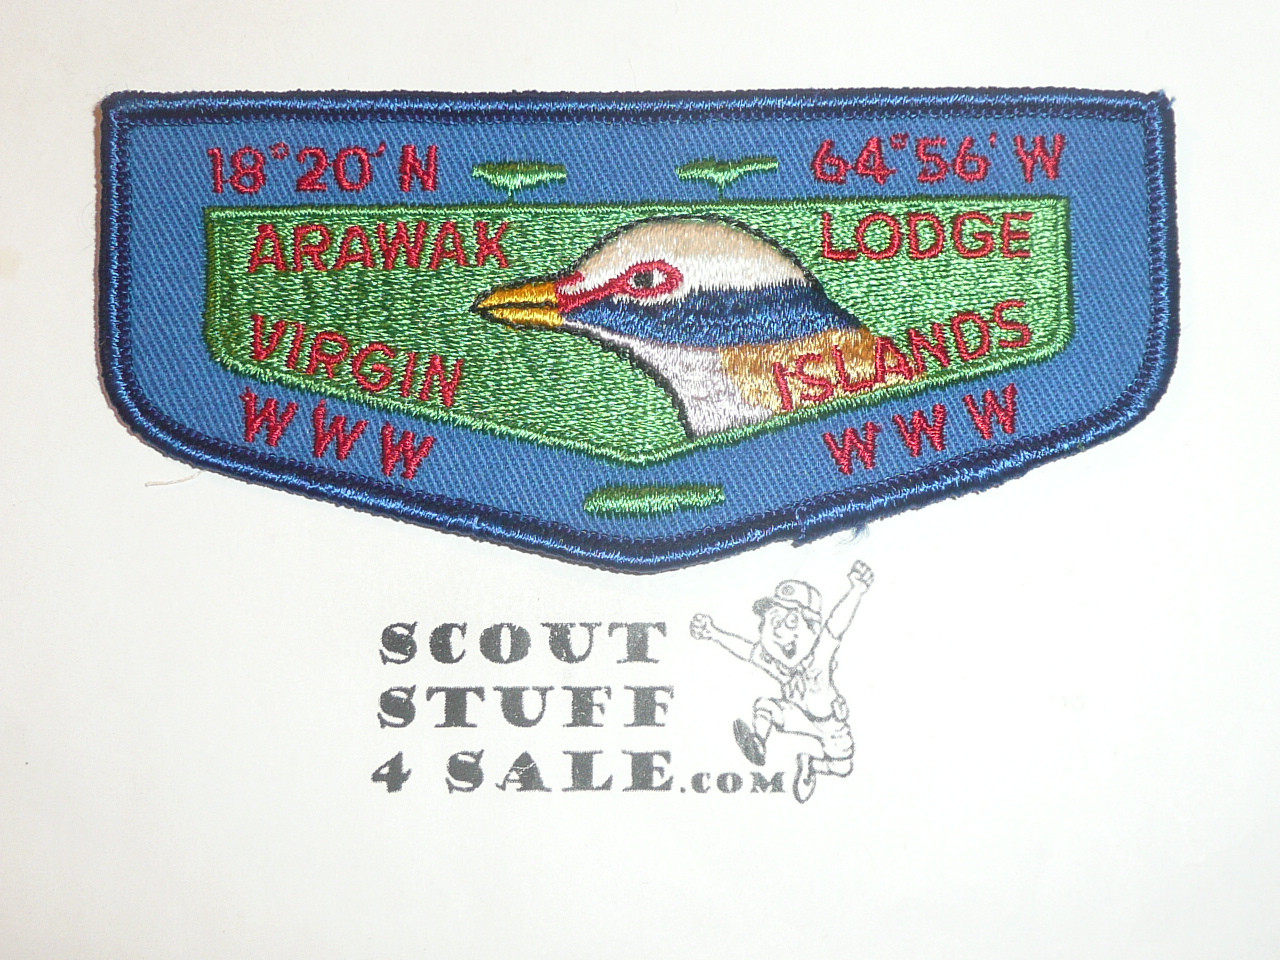 Order of the Arrow Lodge #562 Arawak f1 First Flap Patch - Boy Scout